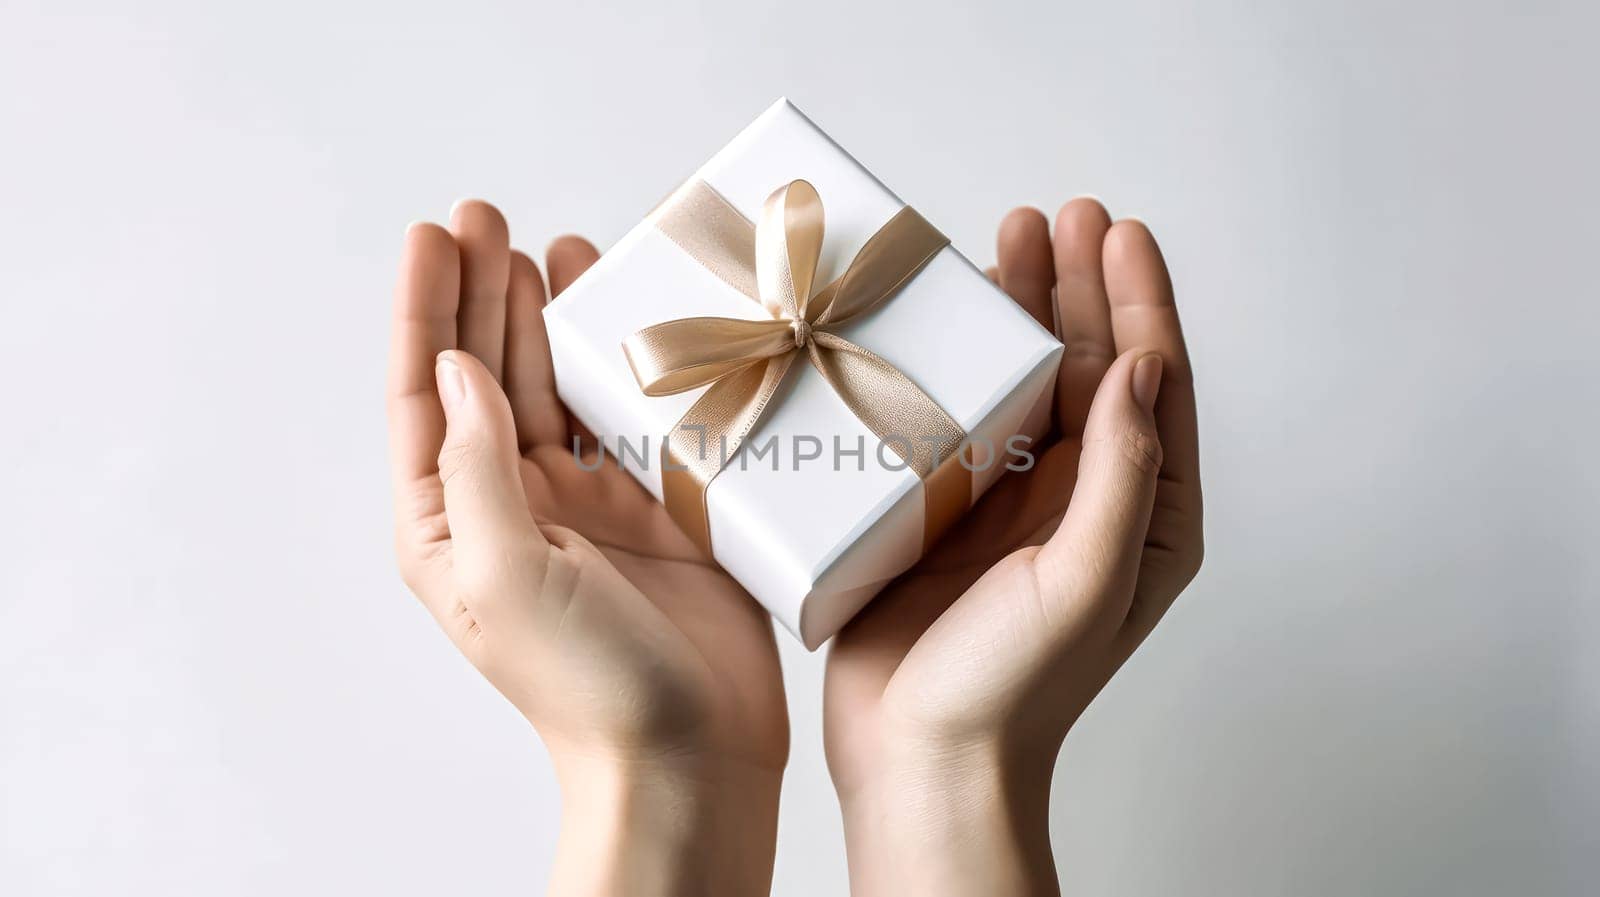 Express love with a tender touch as a girl holds a cute gift box in her hands on a light background, creating a heartfelt Valentines Day concept.